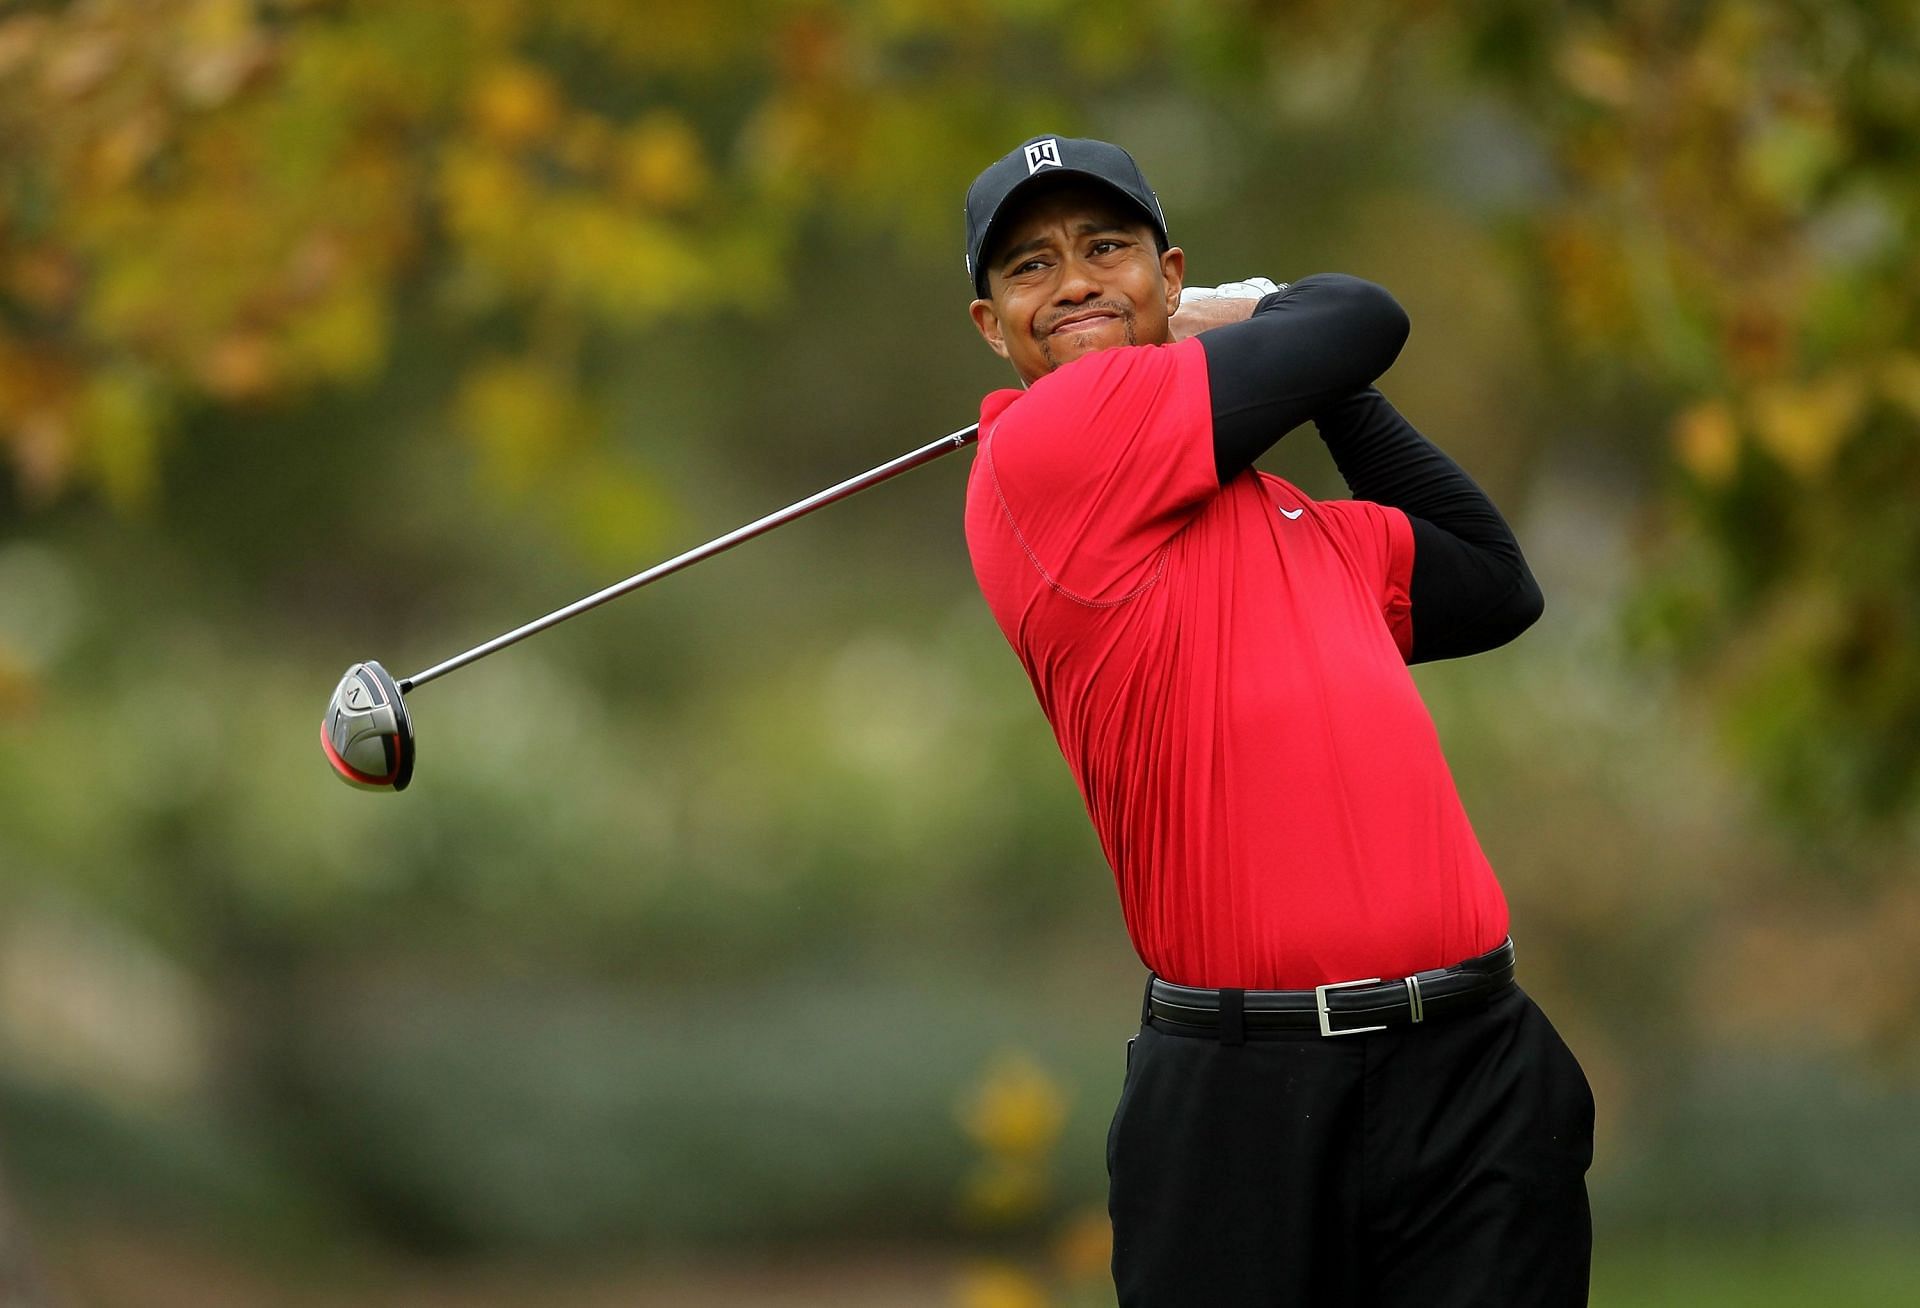 Tiger Wood preferring &quot;stretch&quot; and &quot;relax&quot; over surgery